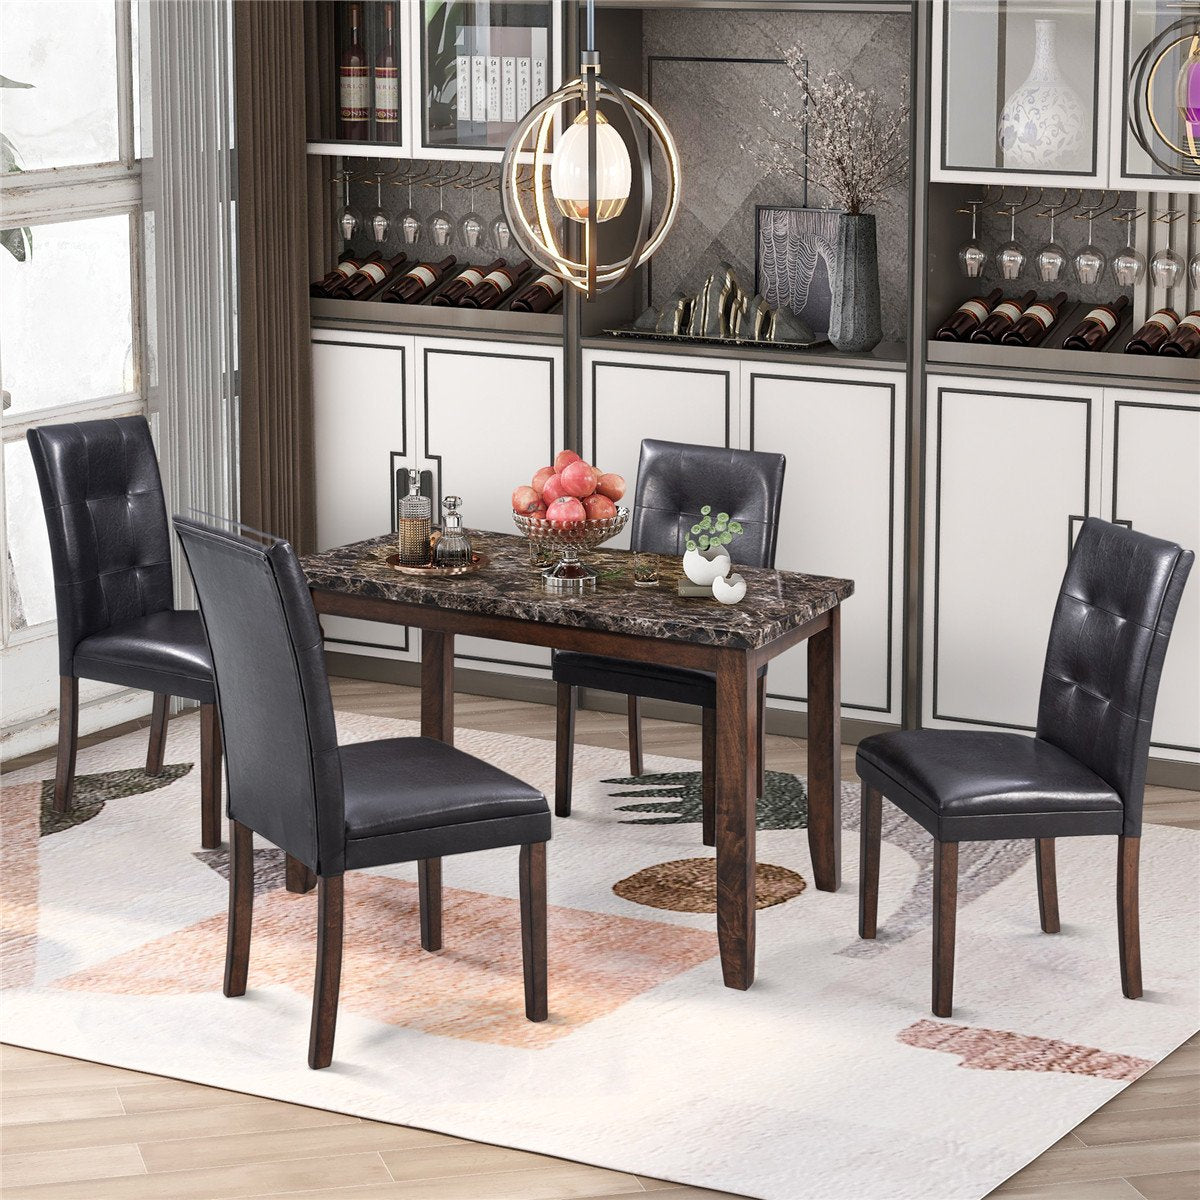 5-Piece Dining Set Table